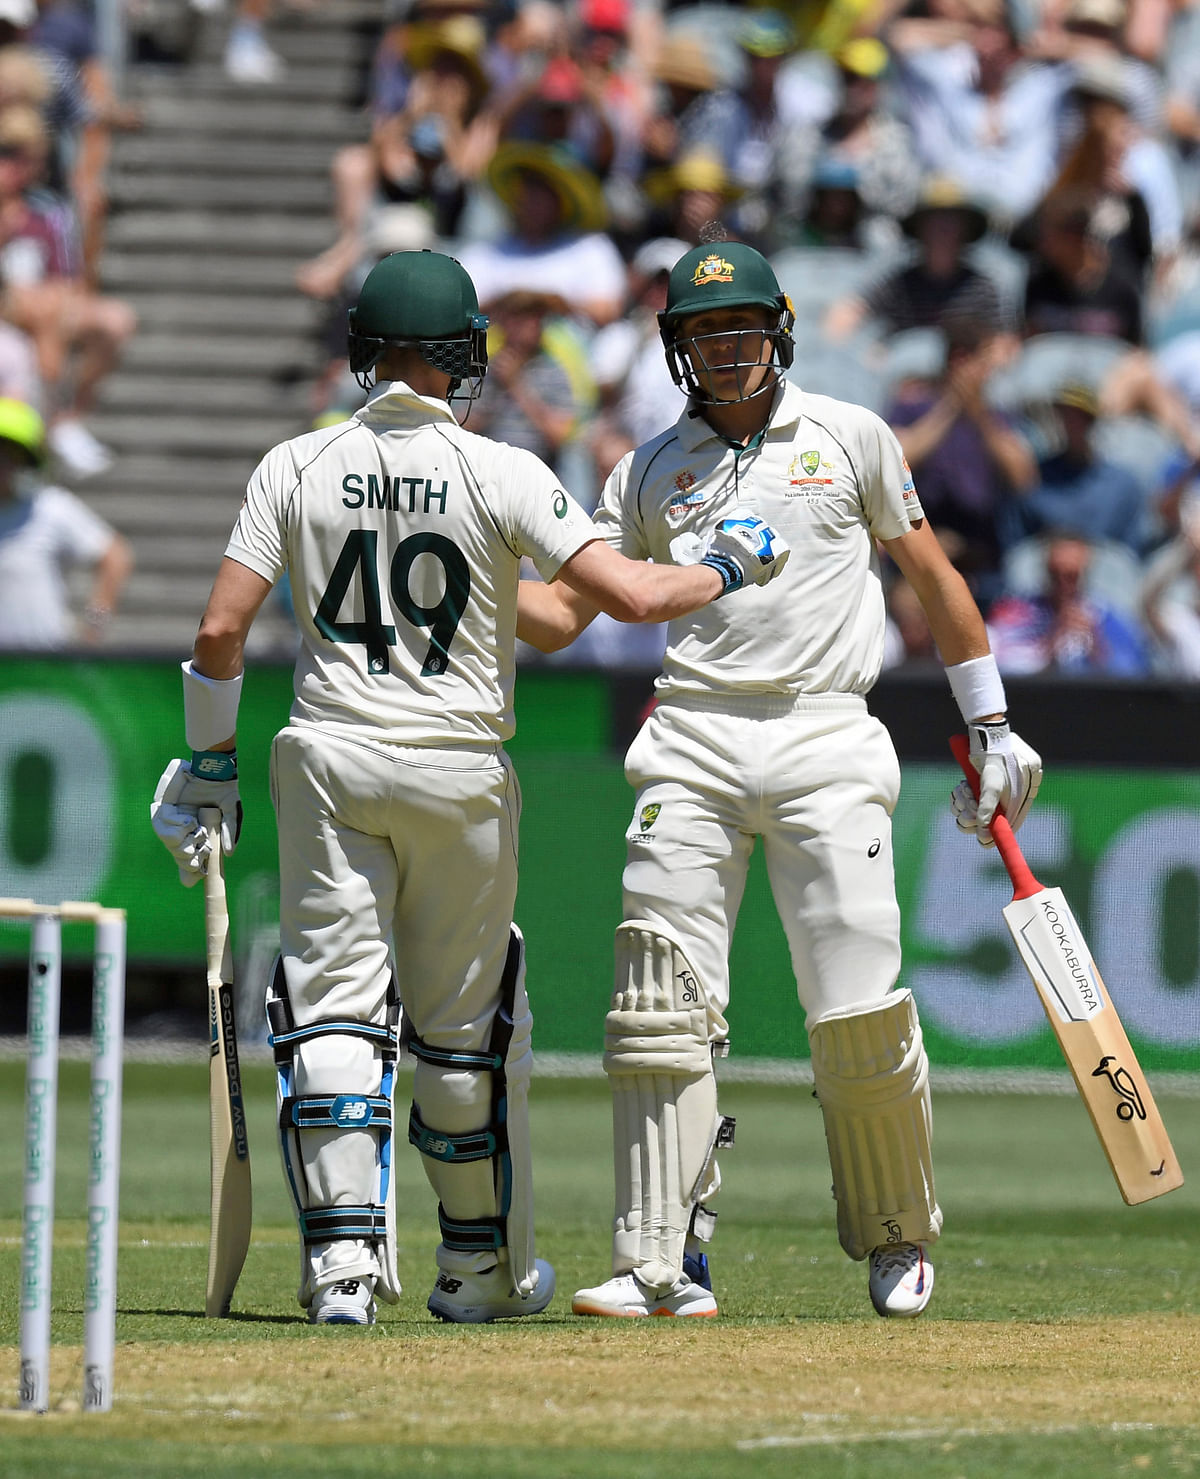 Marnus Labuschagne scored 1104 runs in 2019 – the only cricketer to notch more than 1,000 runs in Test cricket.